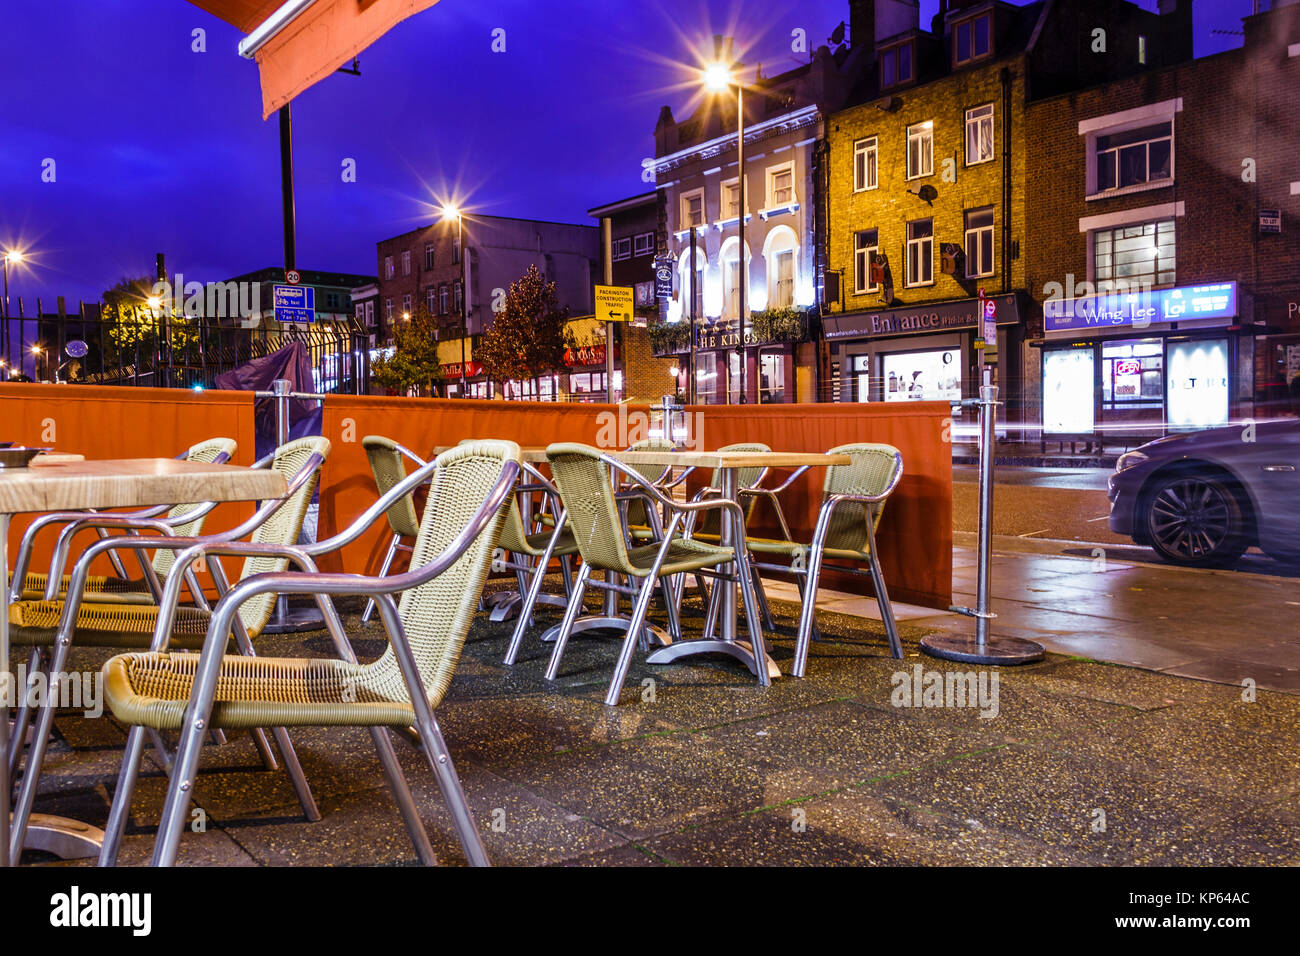 Tables and chairs outside a cafe in Islington, London, UK, after dark Stock Photo